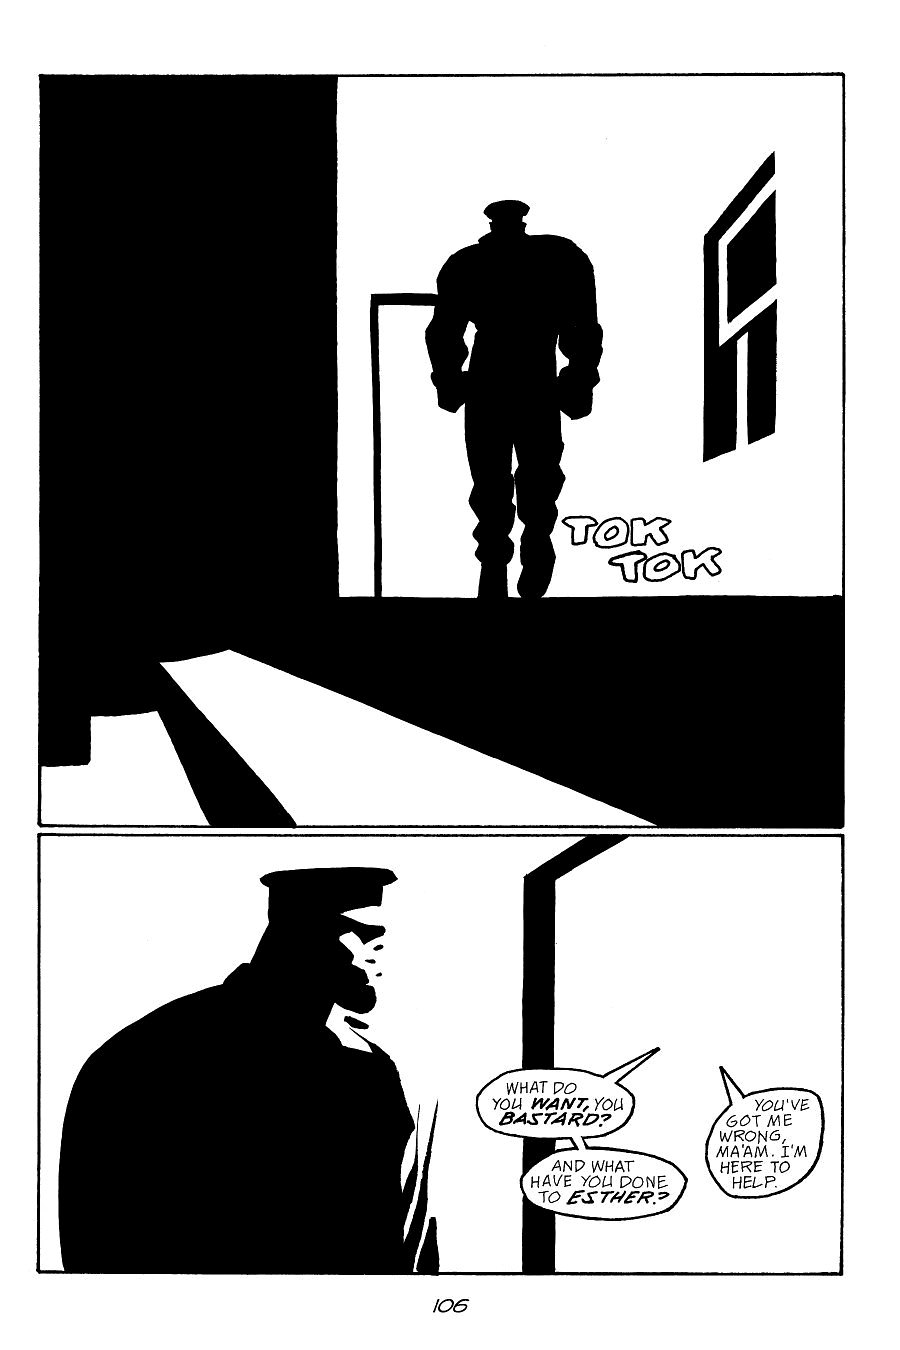 page 106 of sin city 7 hell and back